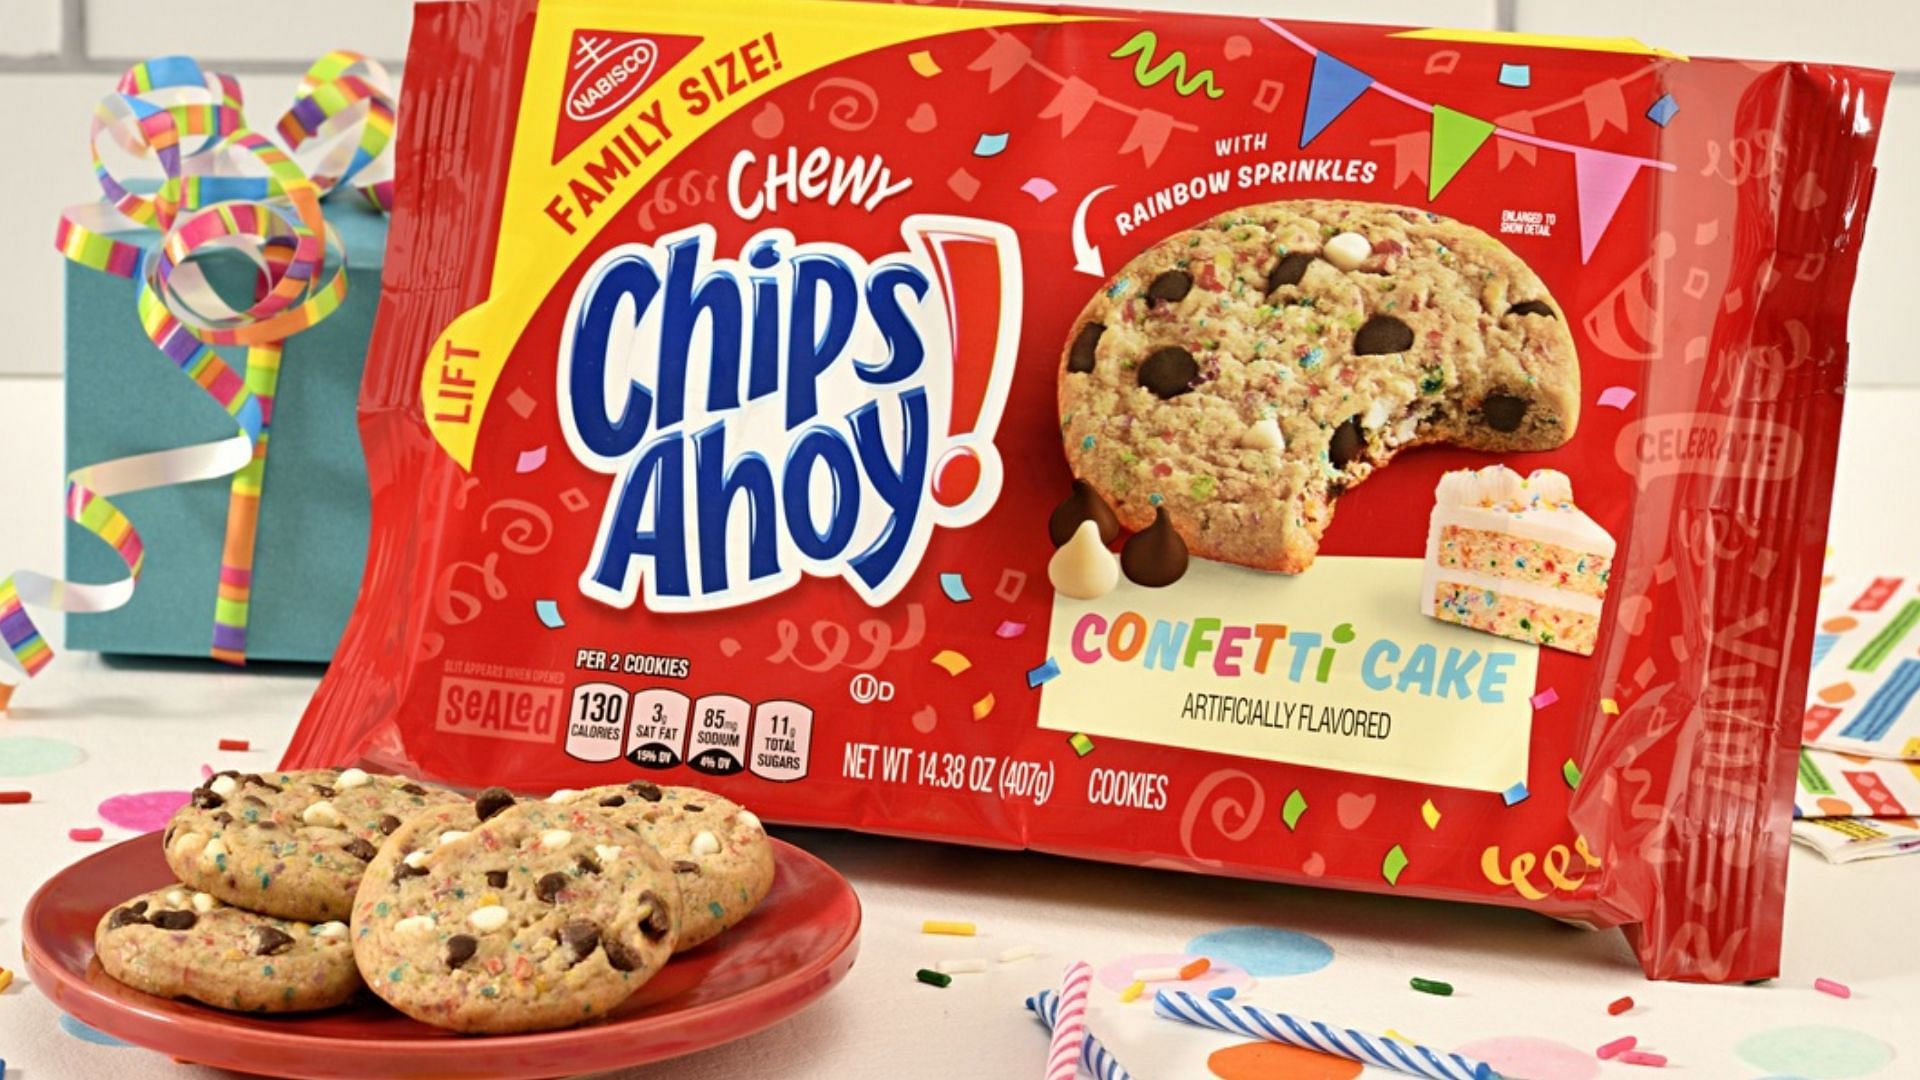 Promotional image for Chips Ahoy&rsquo;s Chewy Confetti Cake Cookies (Image via Chips Ahoy)